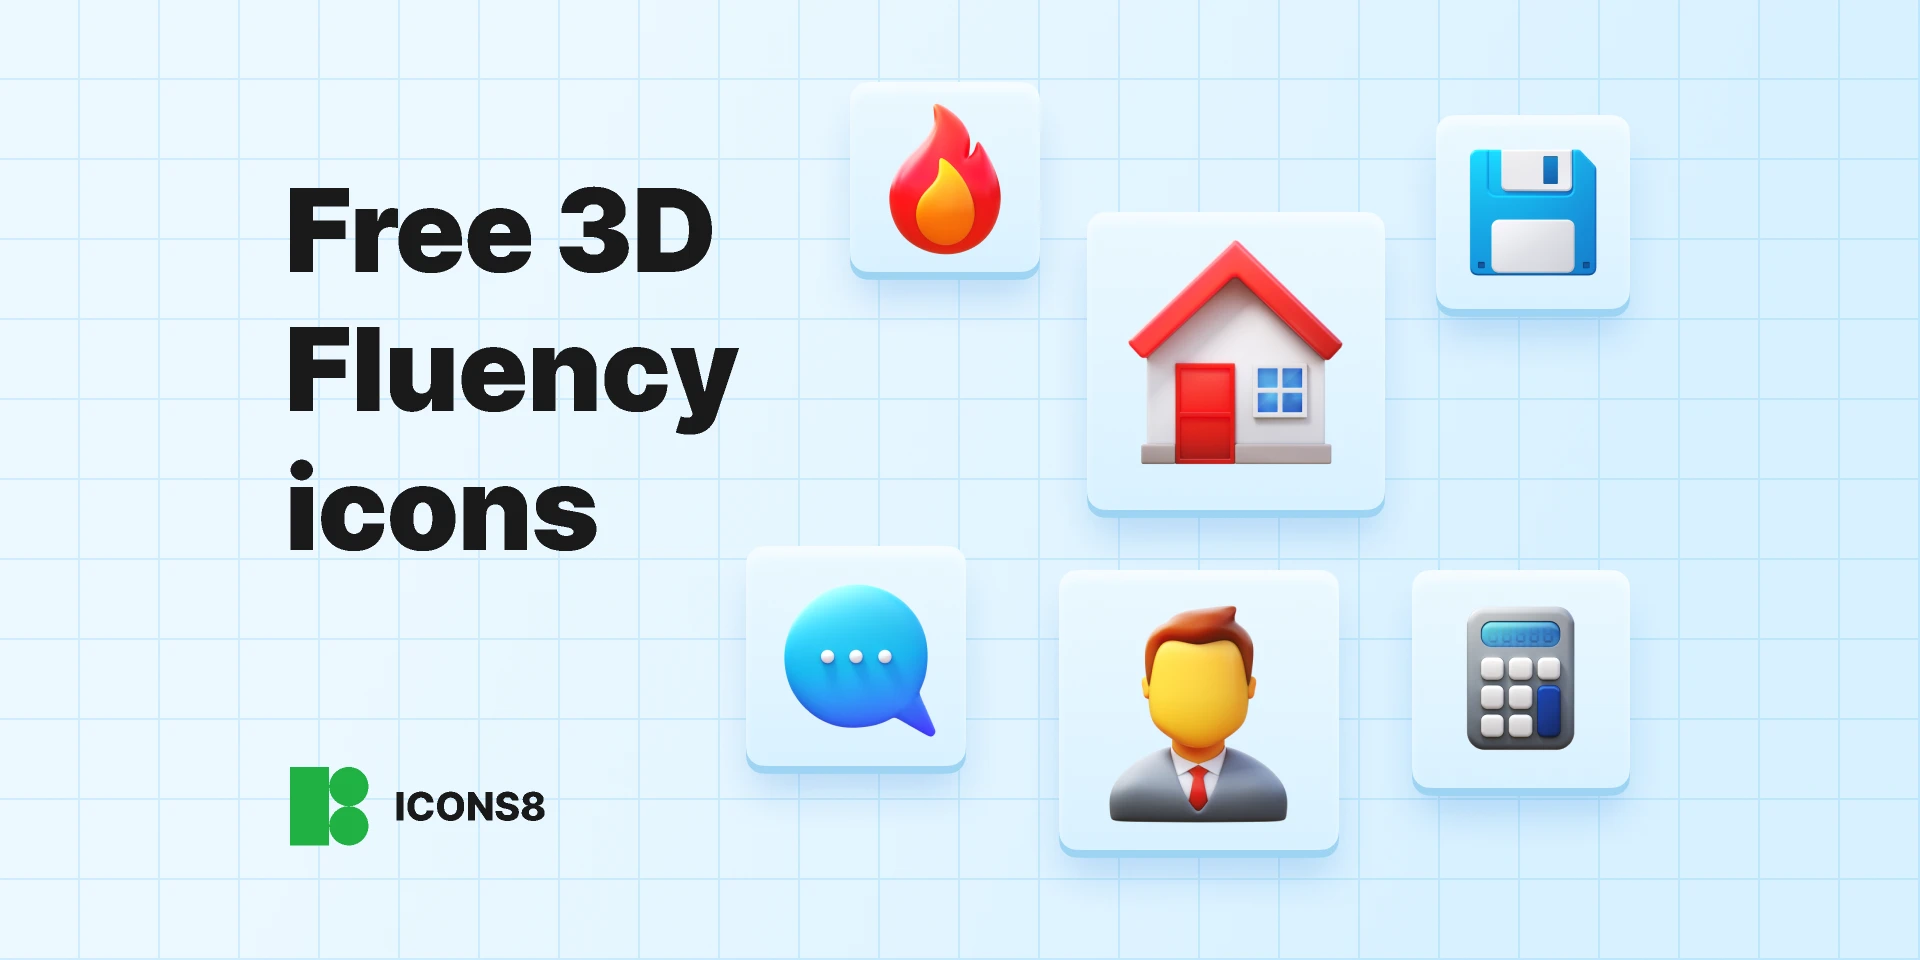 Free 3D Fluency icons for Figma and Adobe XD